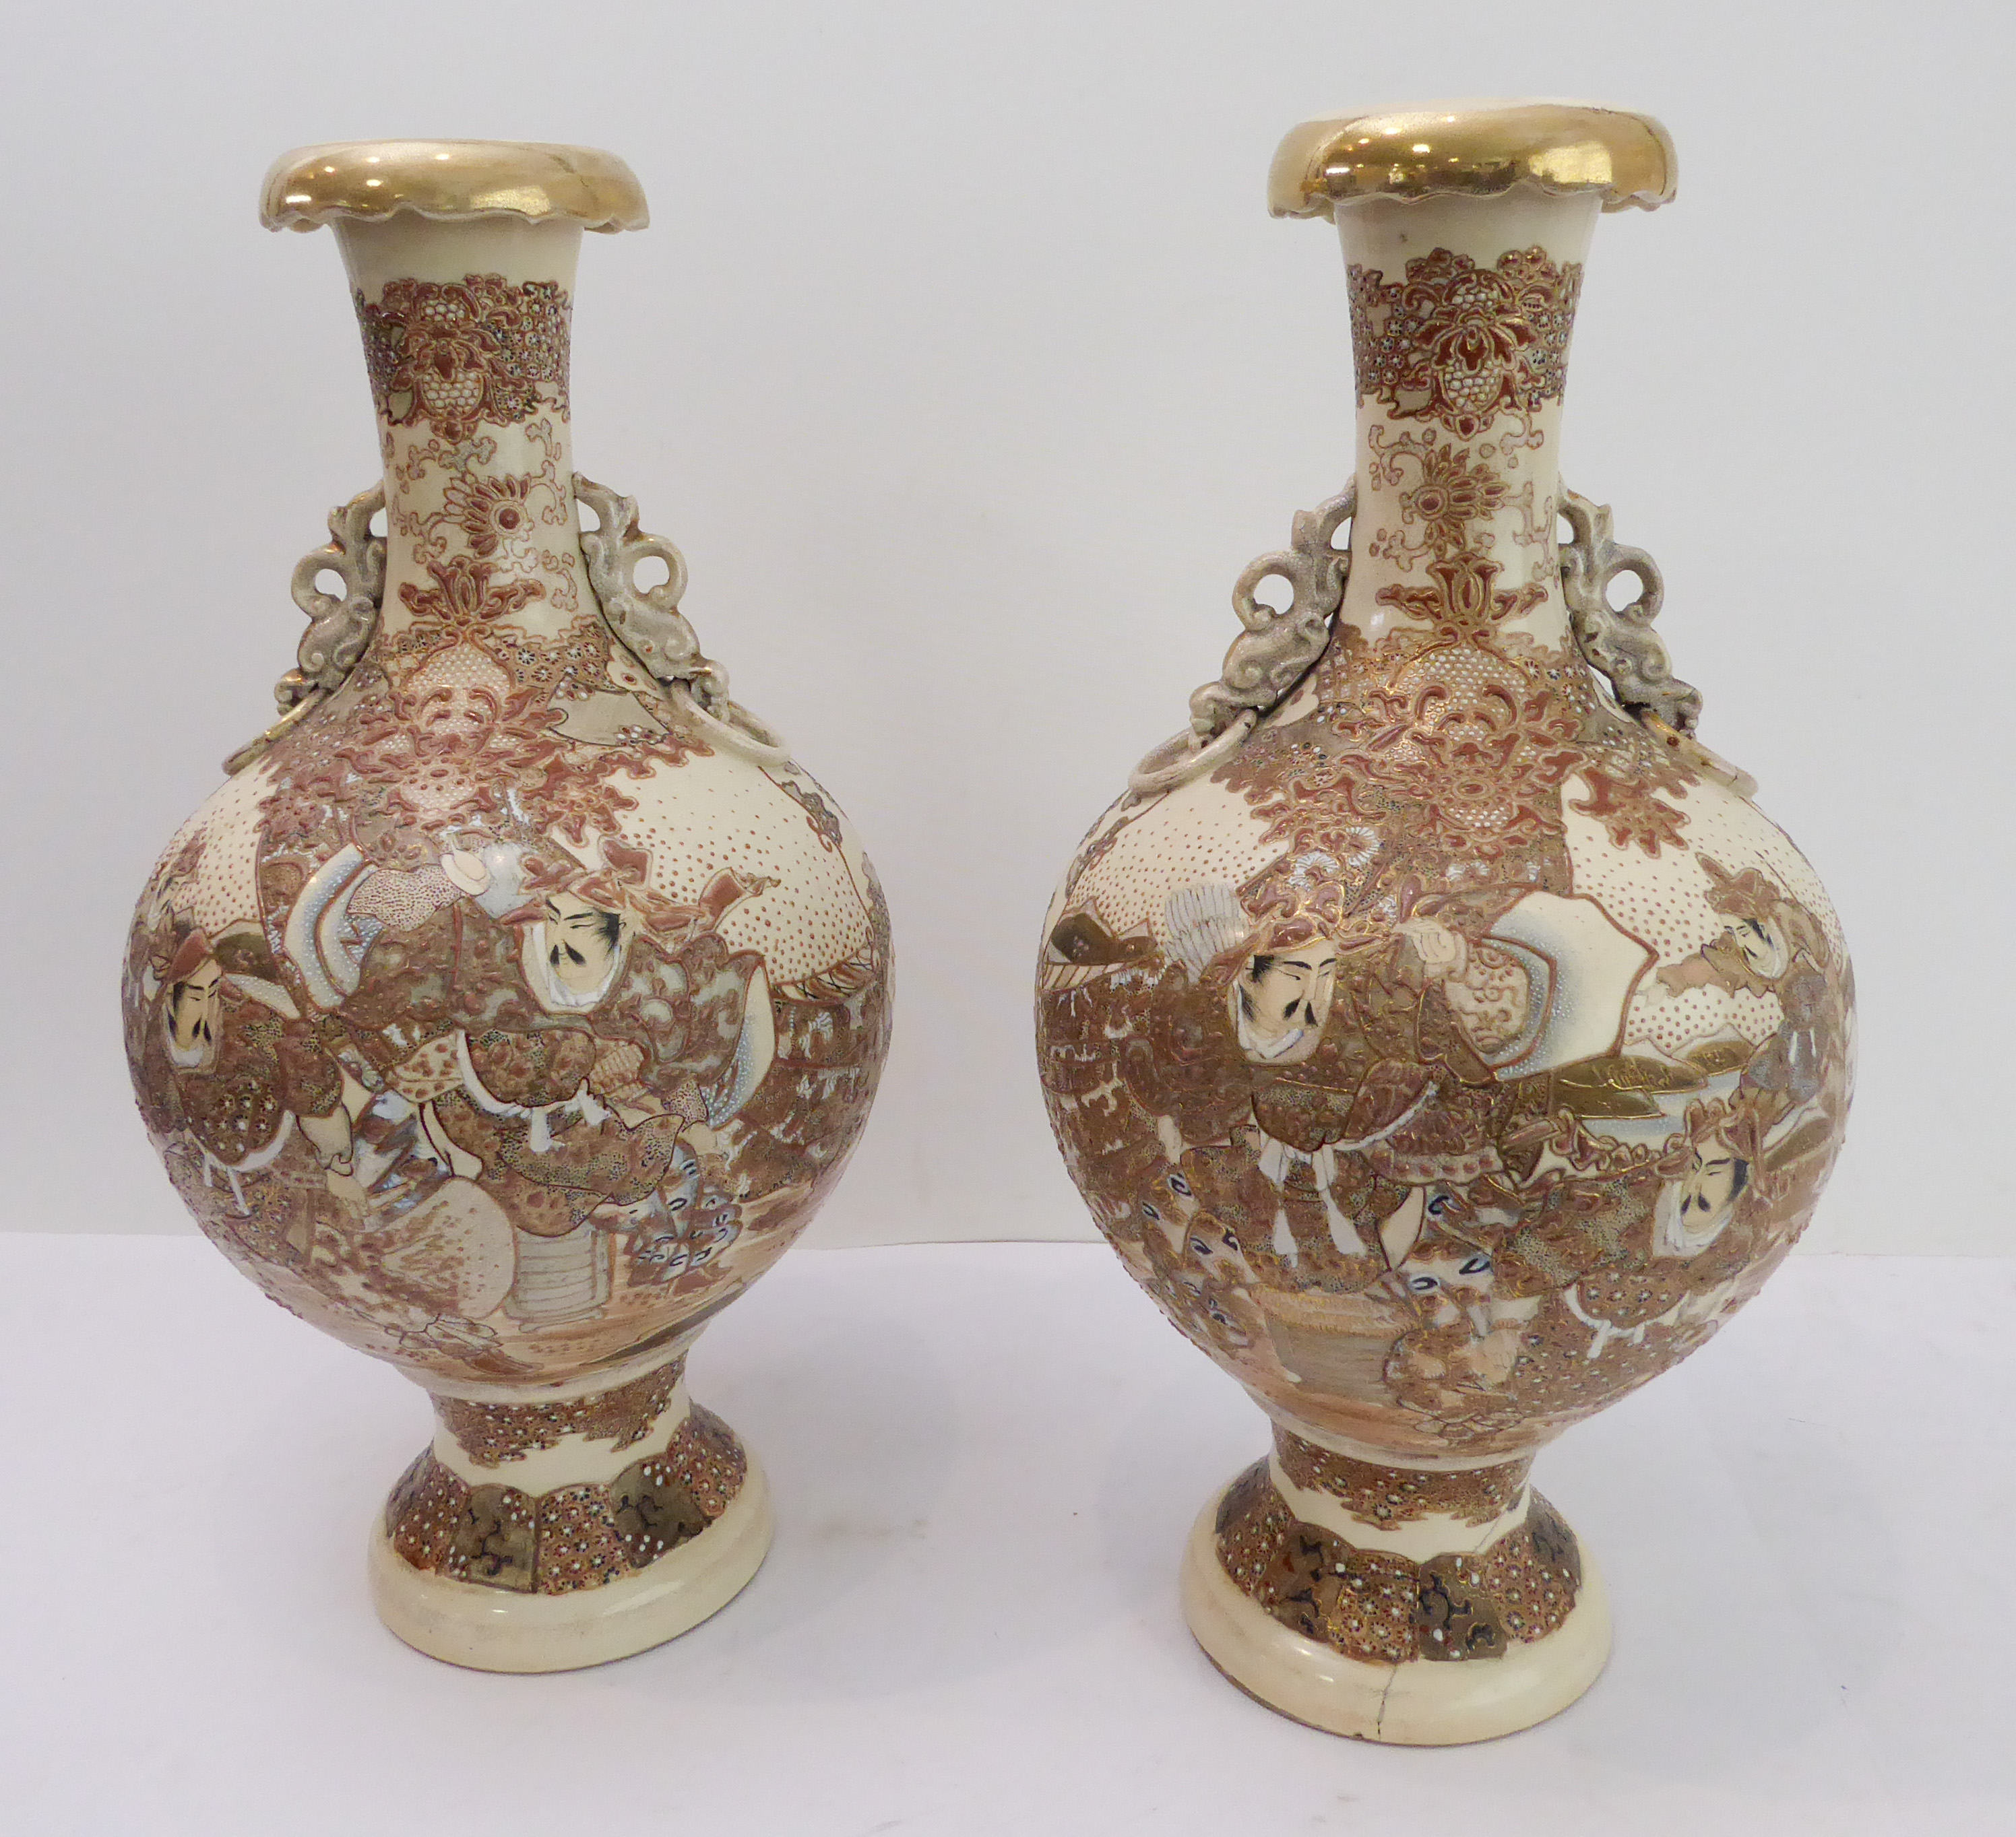 A large pair of early 20th century Japanese satsuma-style pottery vases. Each with overhanging